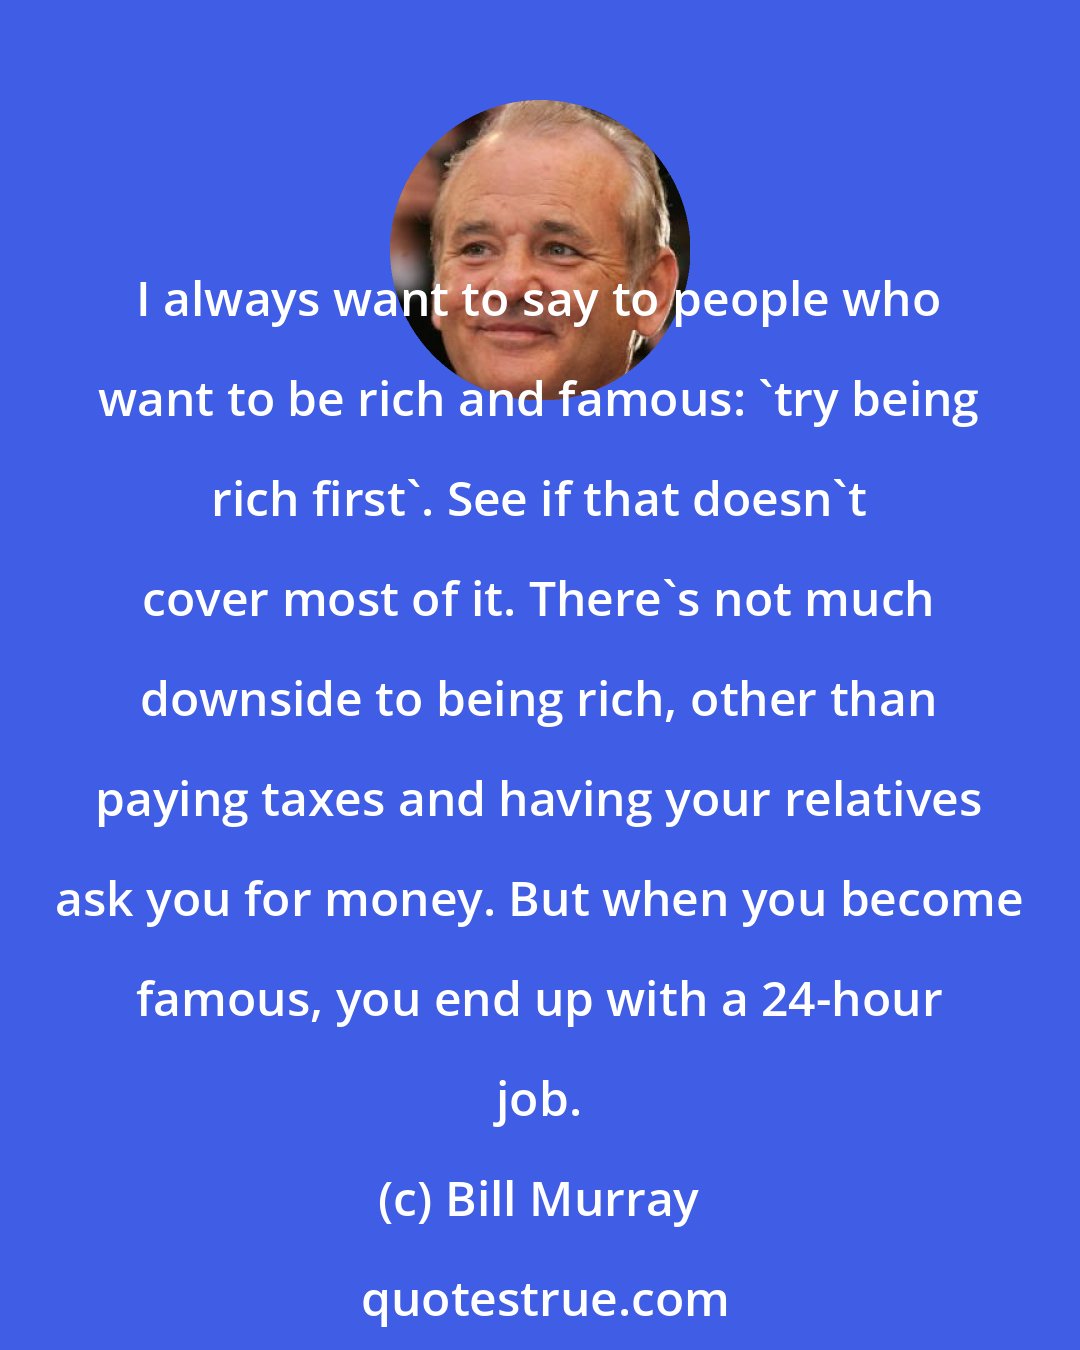 Bill Murray: I always want to say to people who want to be rich and famous: 'try being rich first'. See if that doesn't cover most of it. There's not much downside to being rich, other than paying taxes and having your relatives ask you for money. But when you become famous, you end up with a 24-hour job.